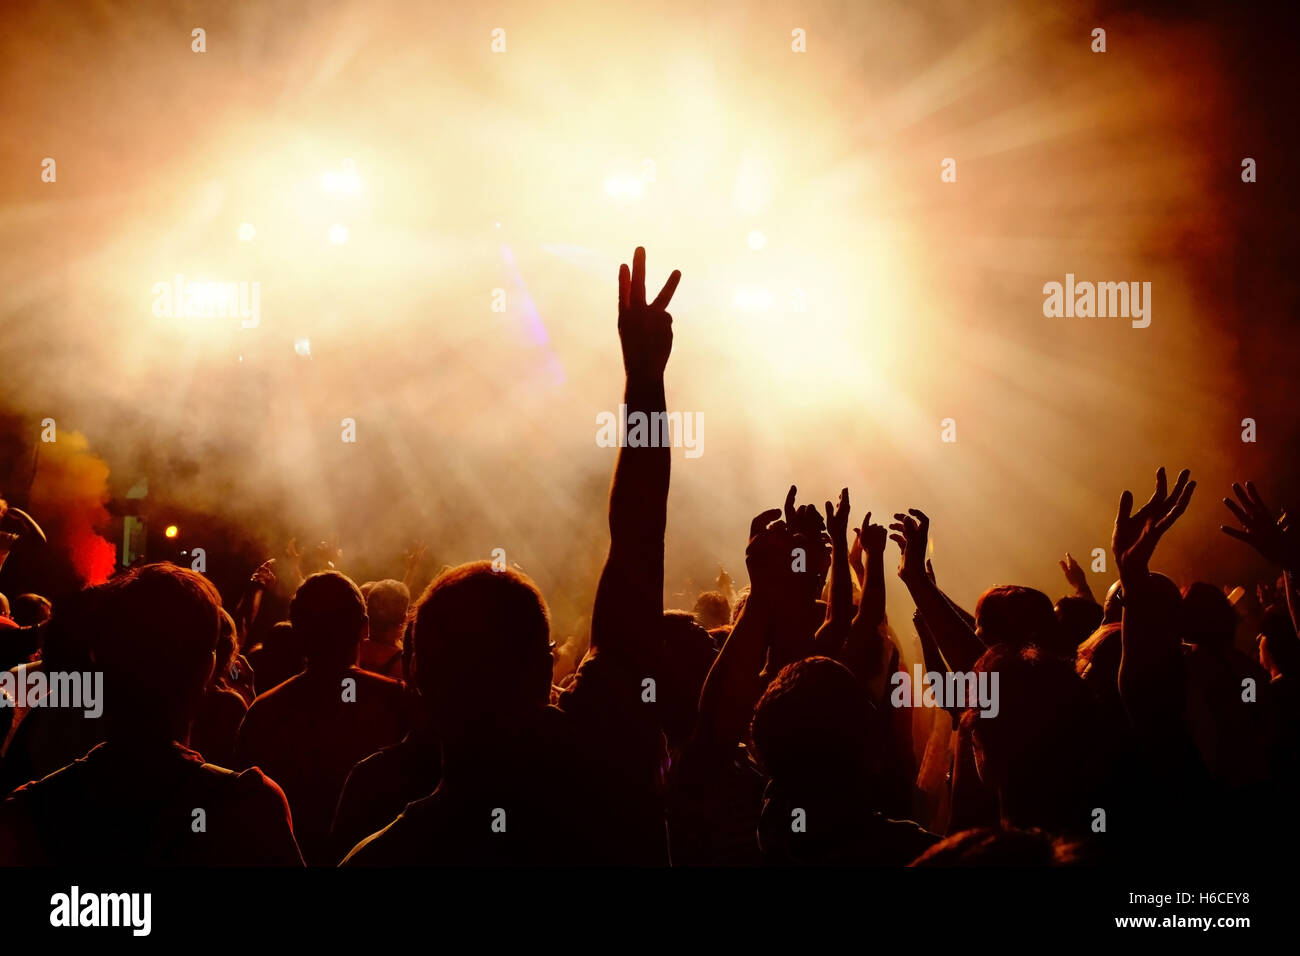 Silhouettes of festive crowd of young people dancing at music festival. Raising hands against smoky orange background. Stock Photo